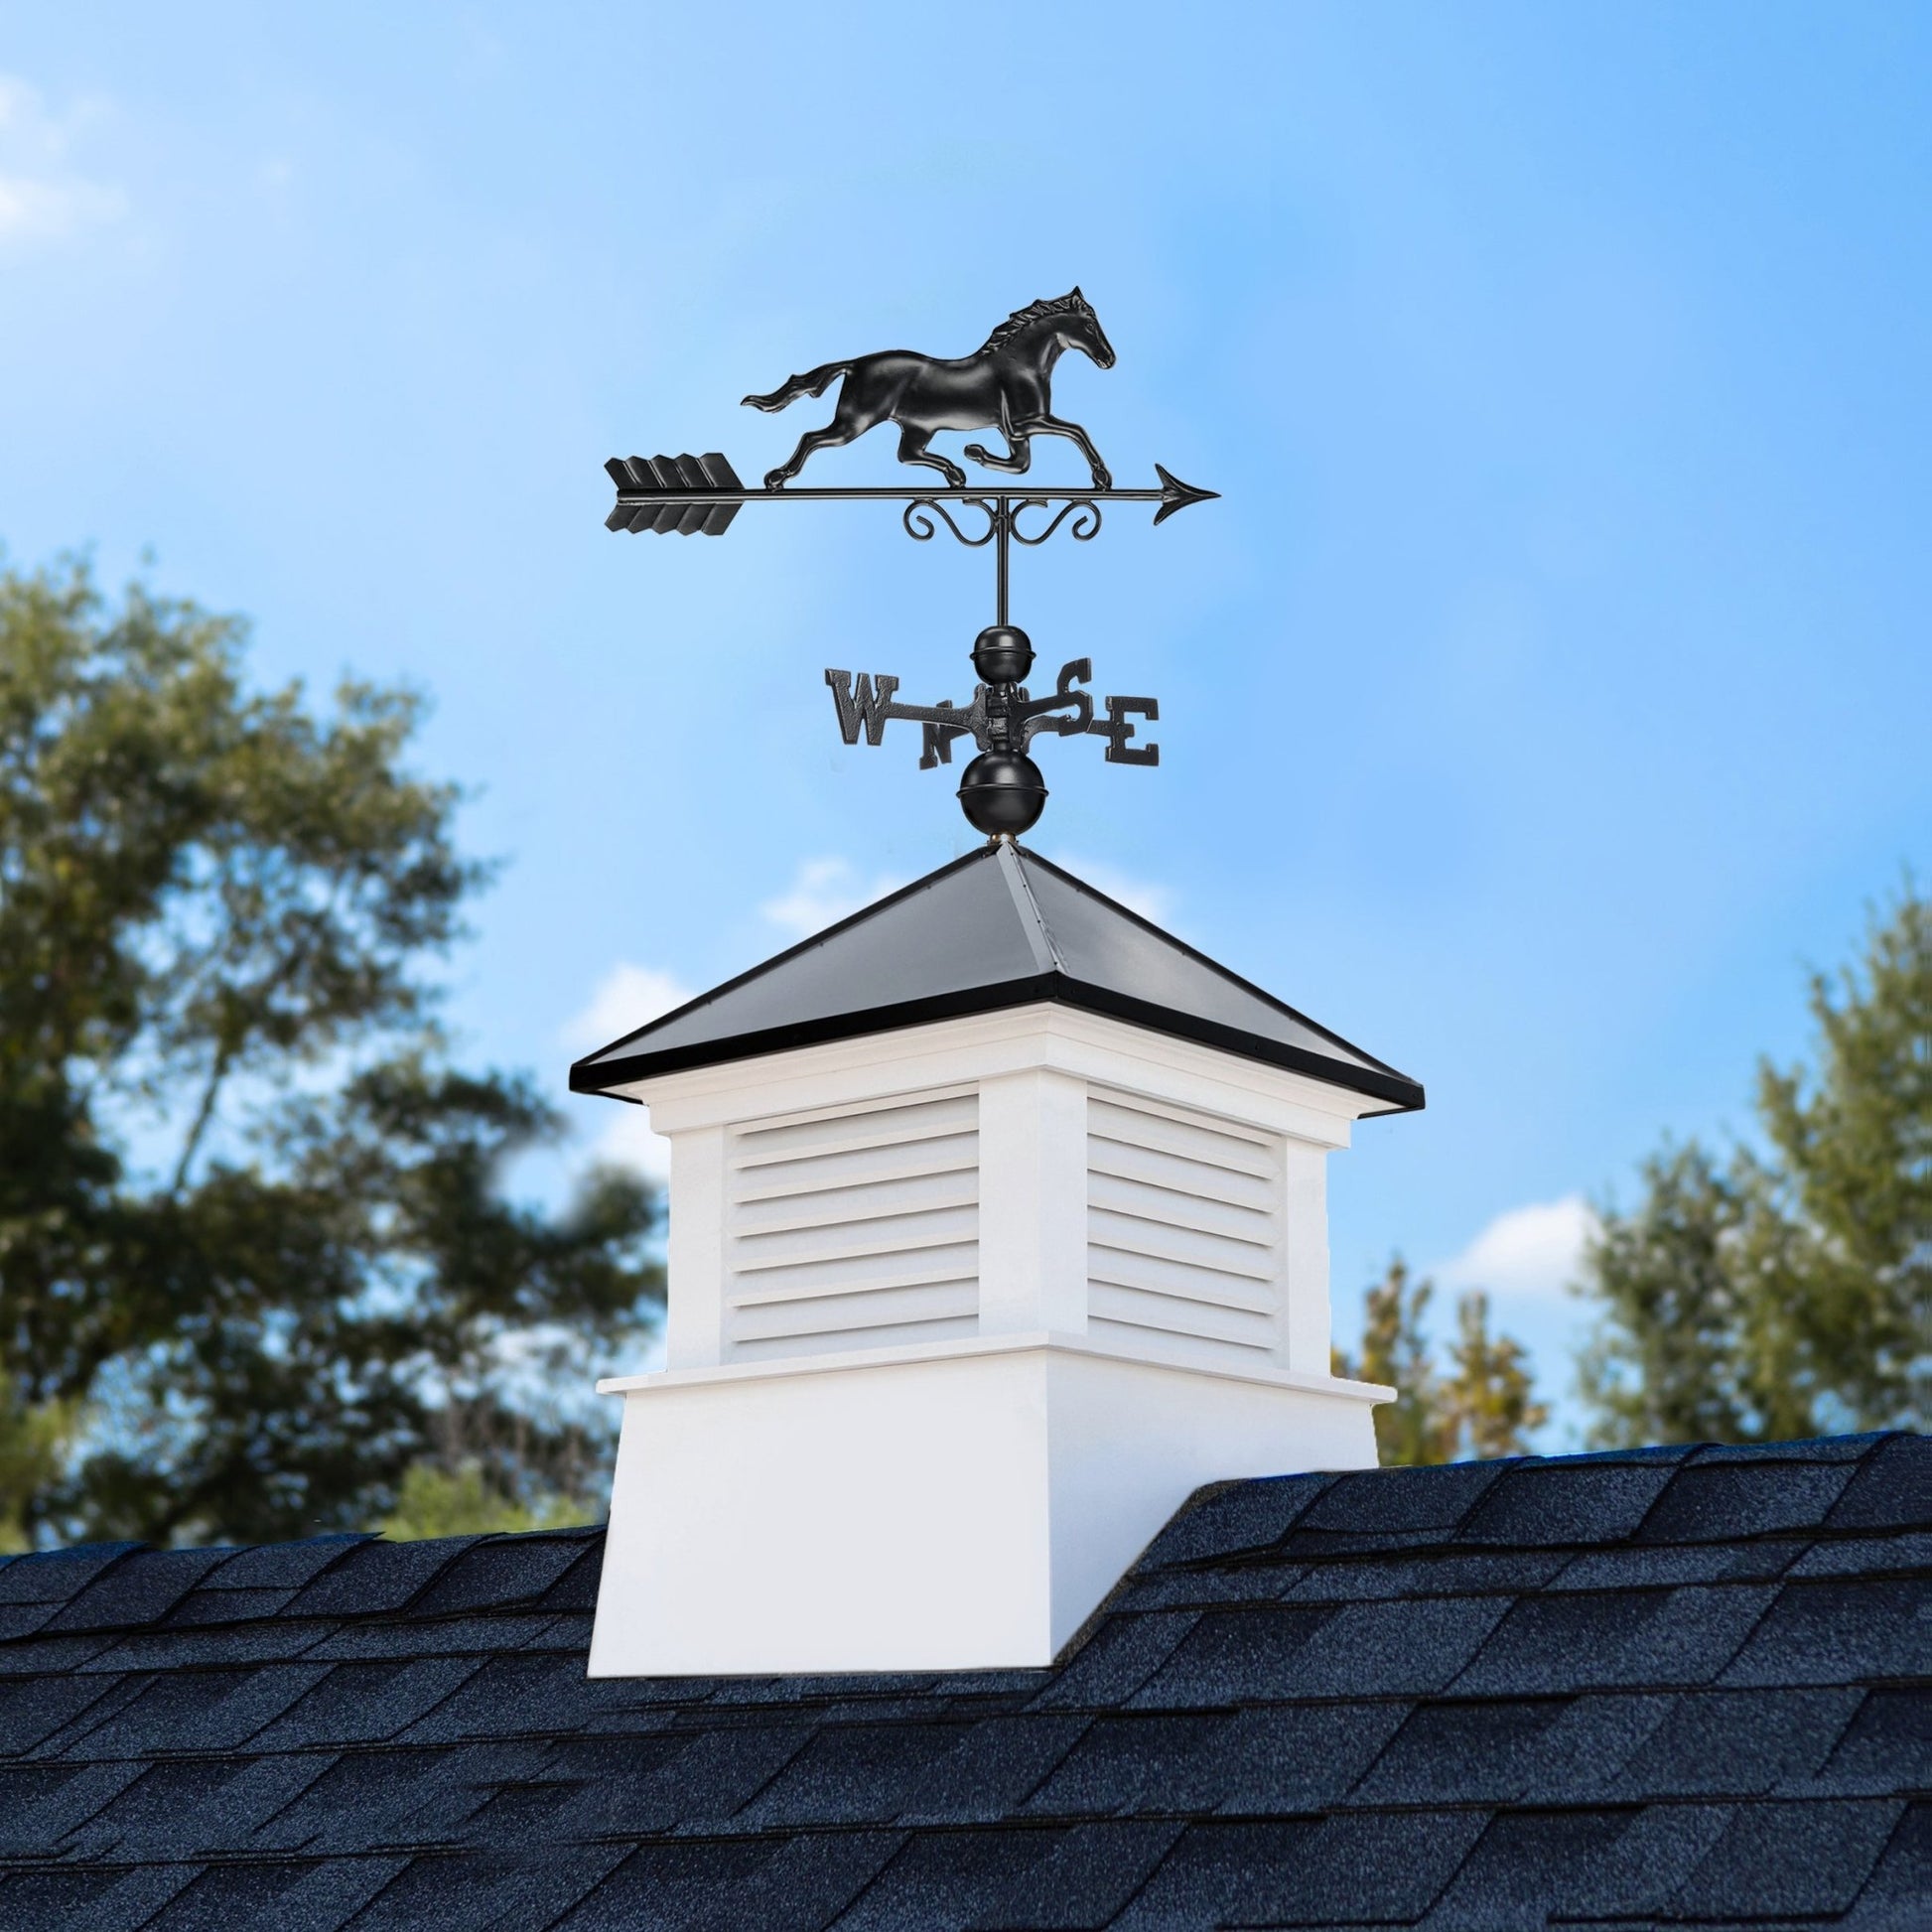 30" Square Manchester Vinyl Cupola with Black Aluminum roof and Black Aluminum Horse - Good Directions